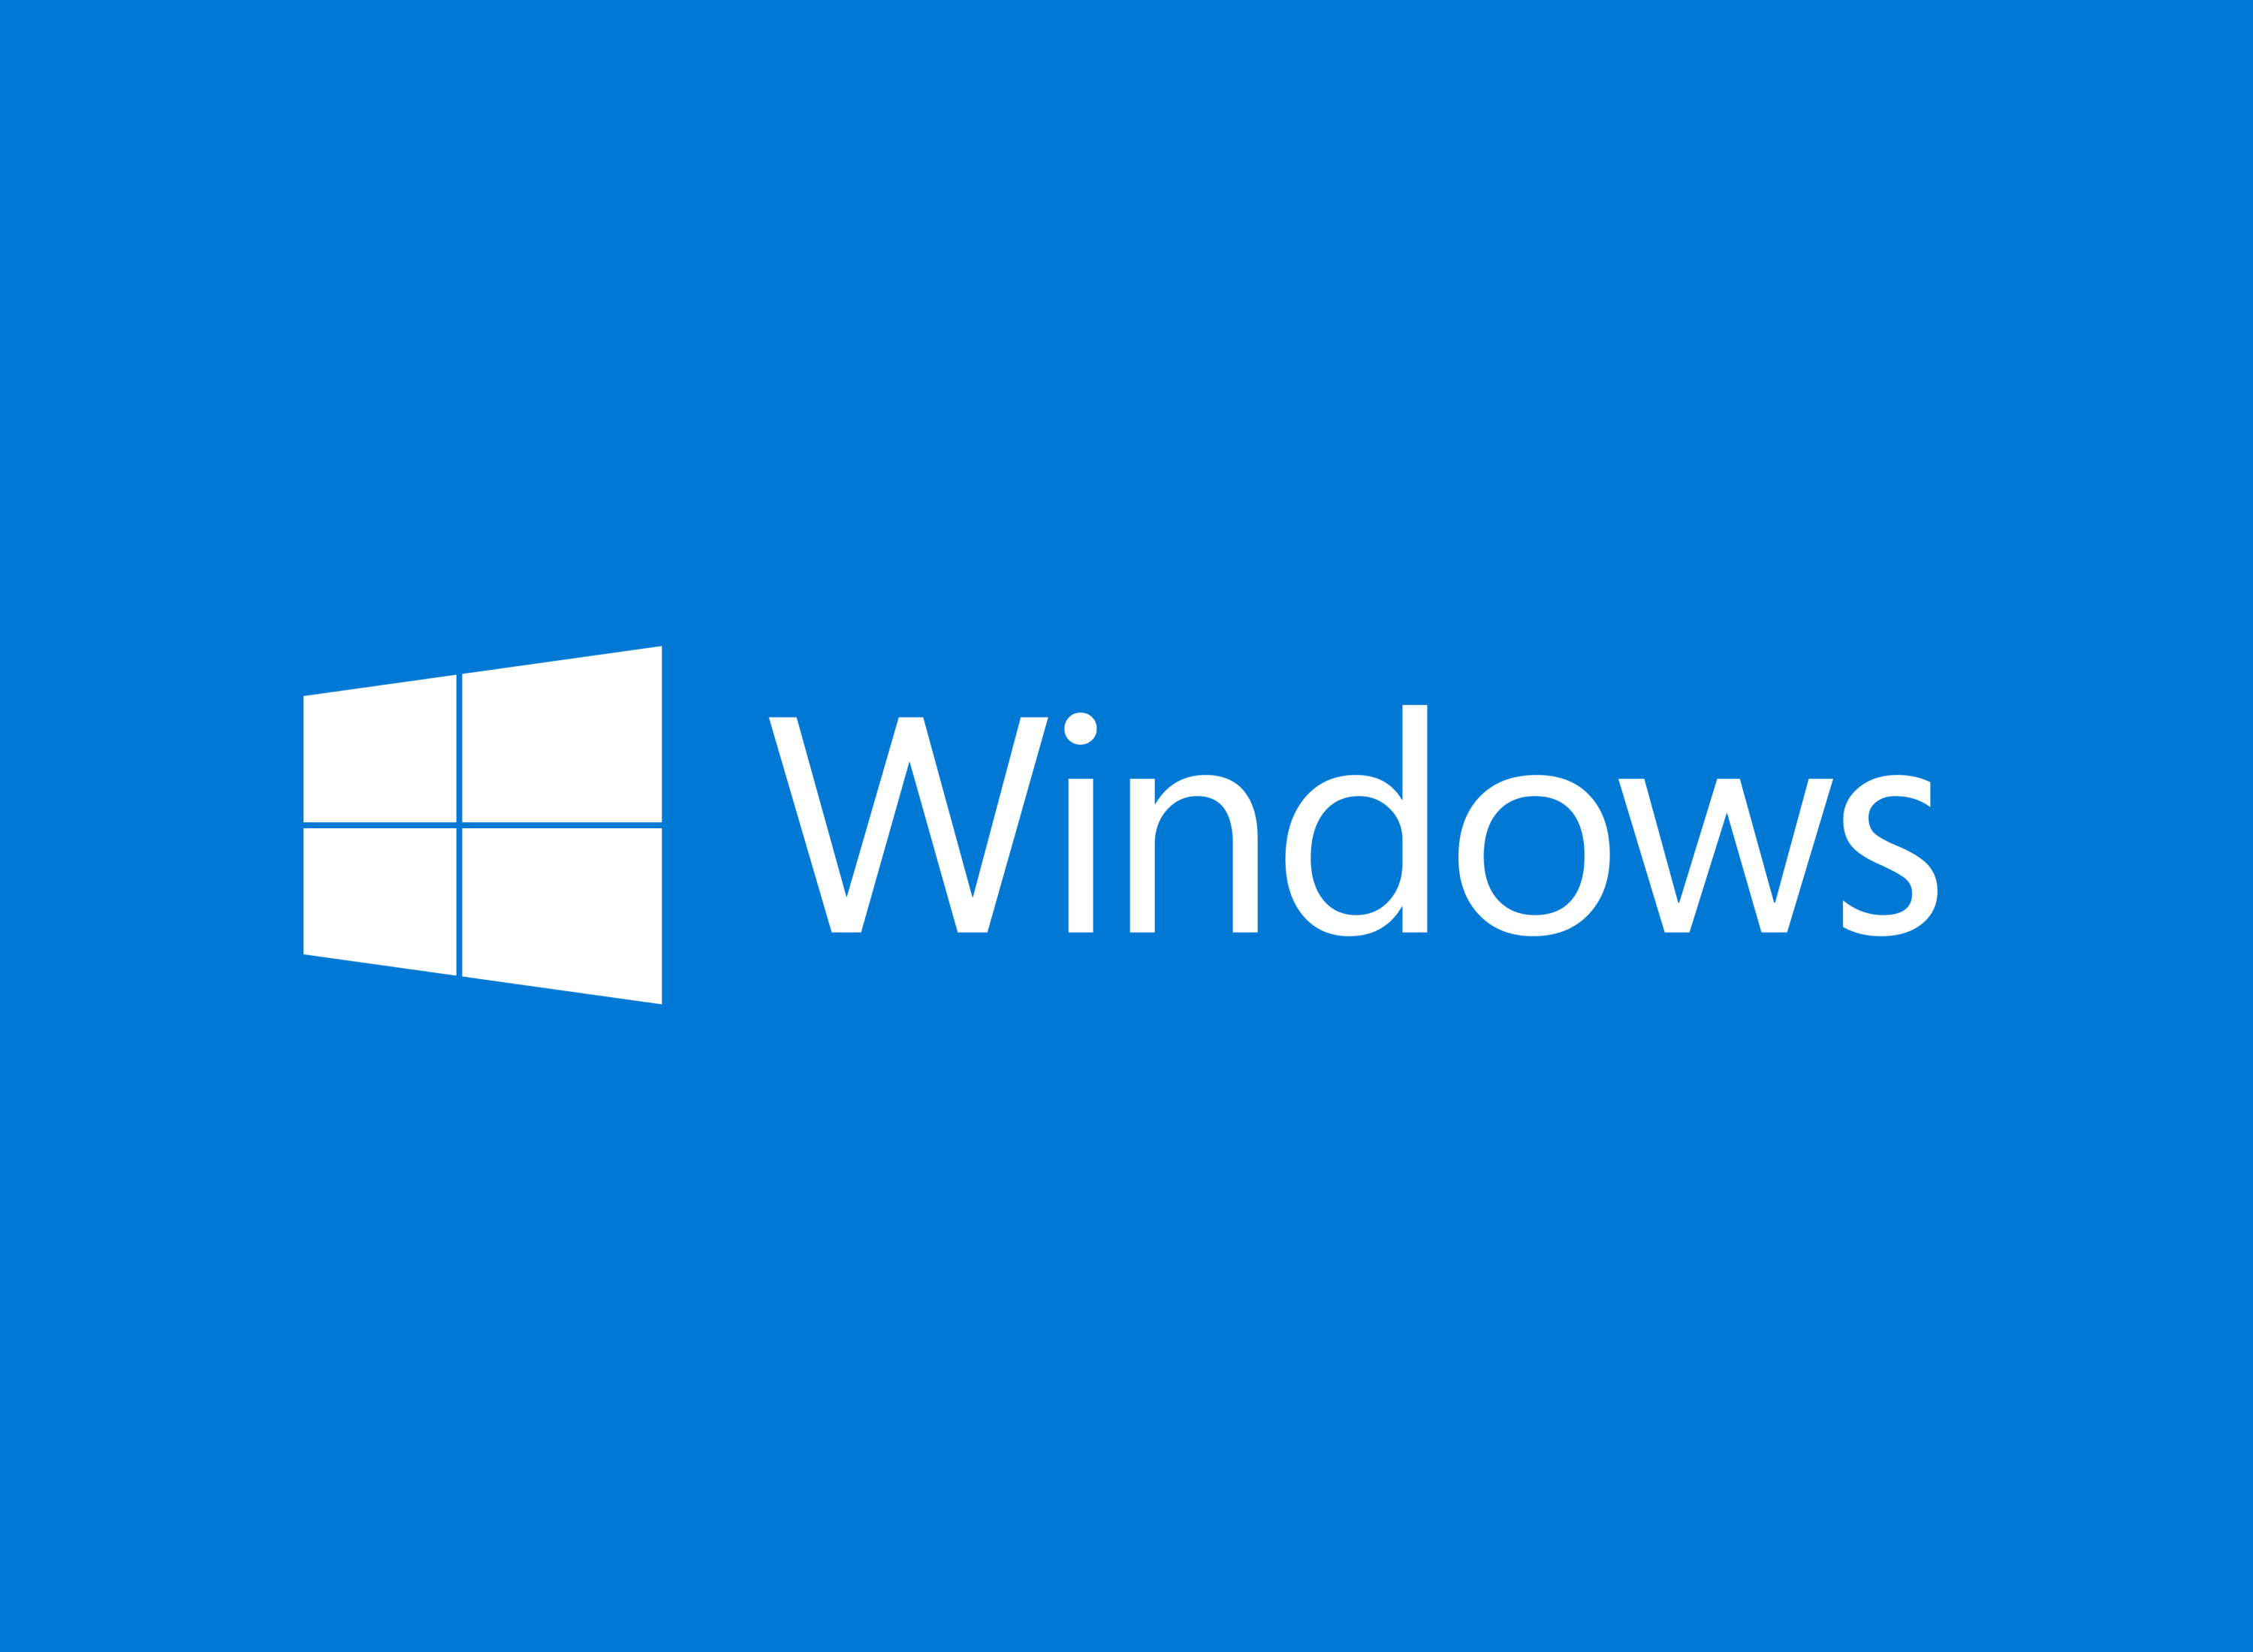 How to get the Windows 10 May 2021 Update